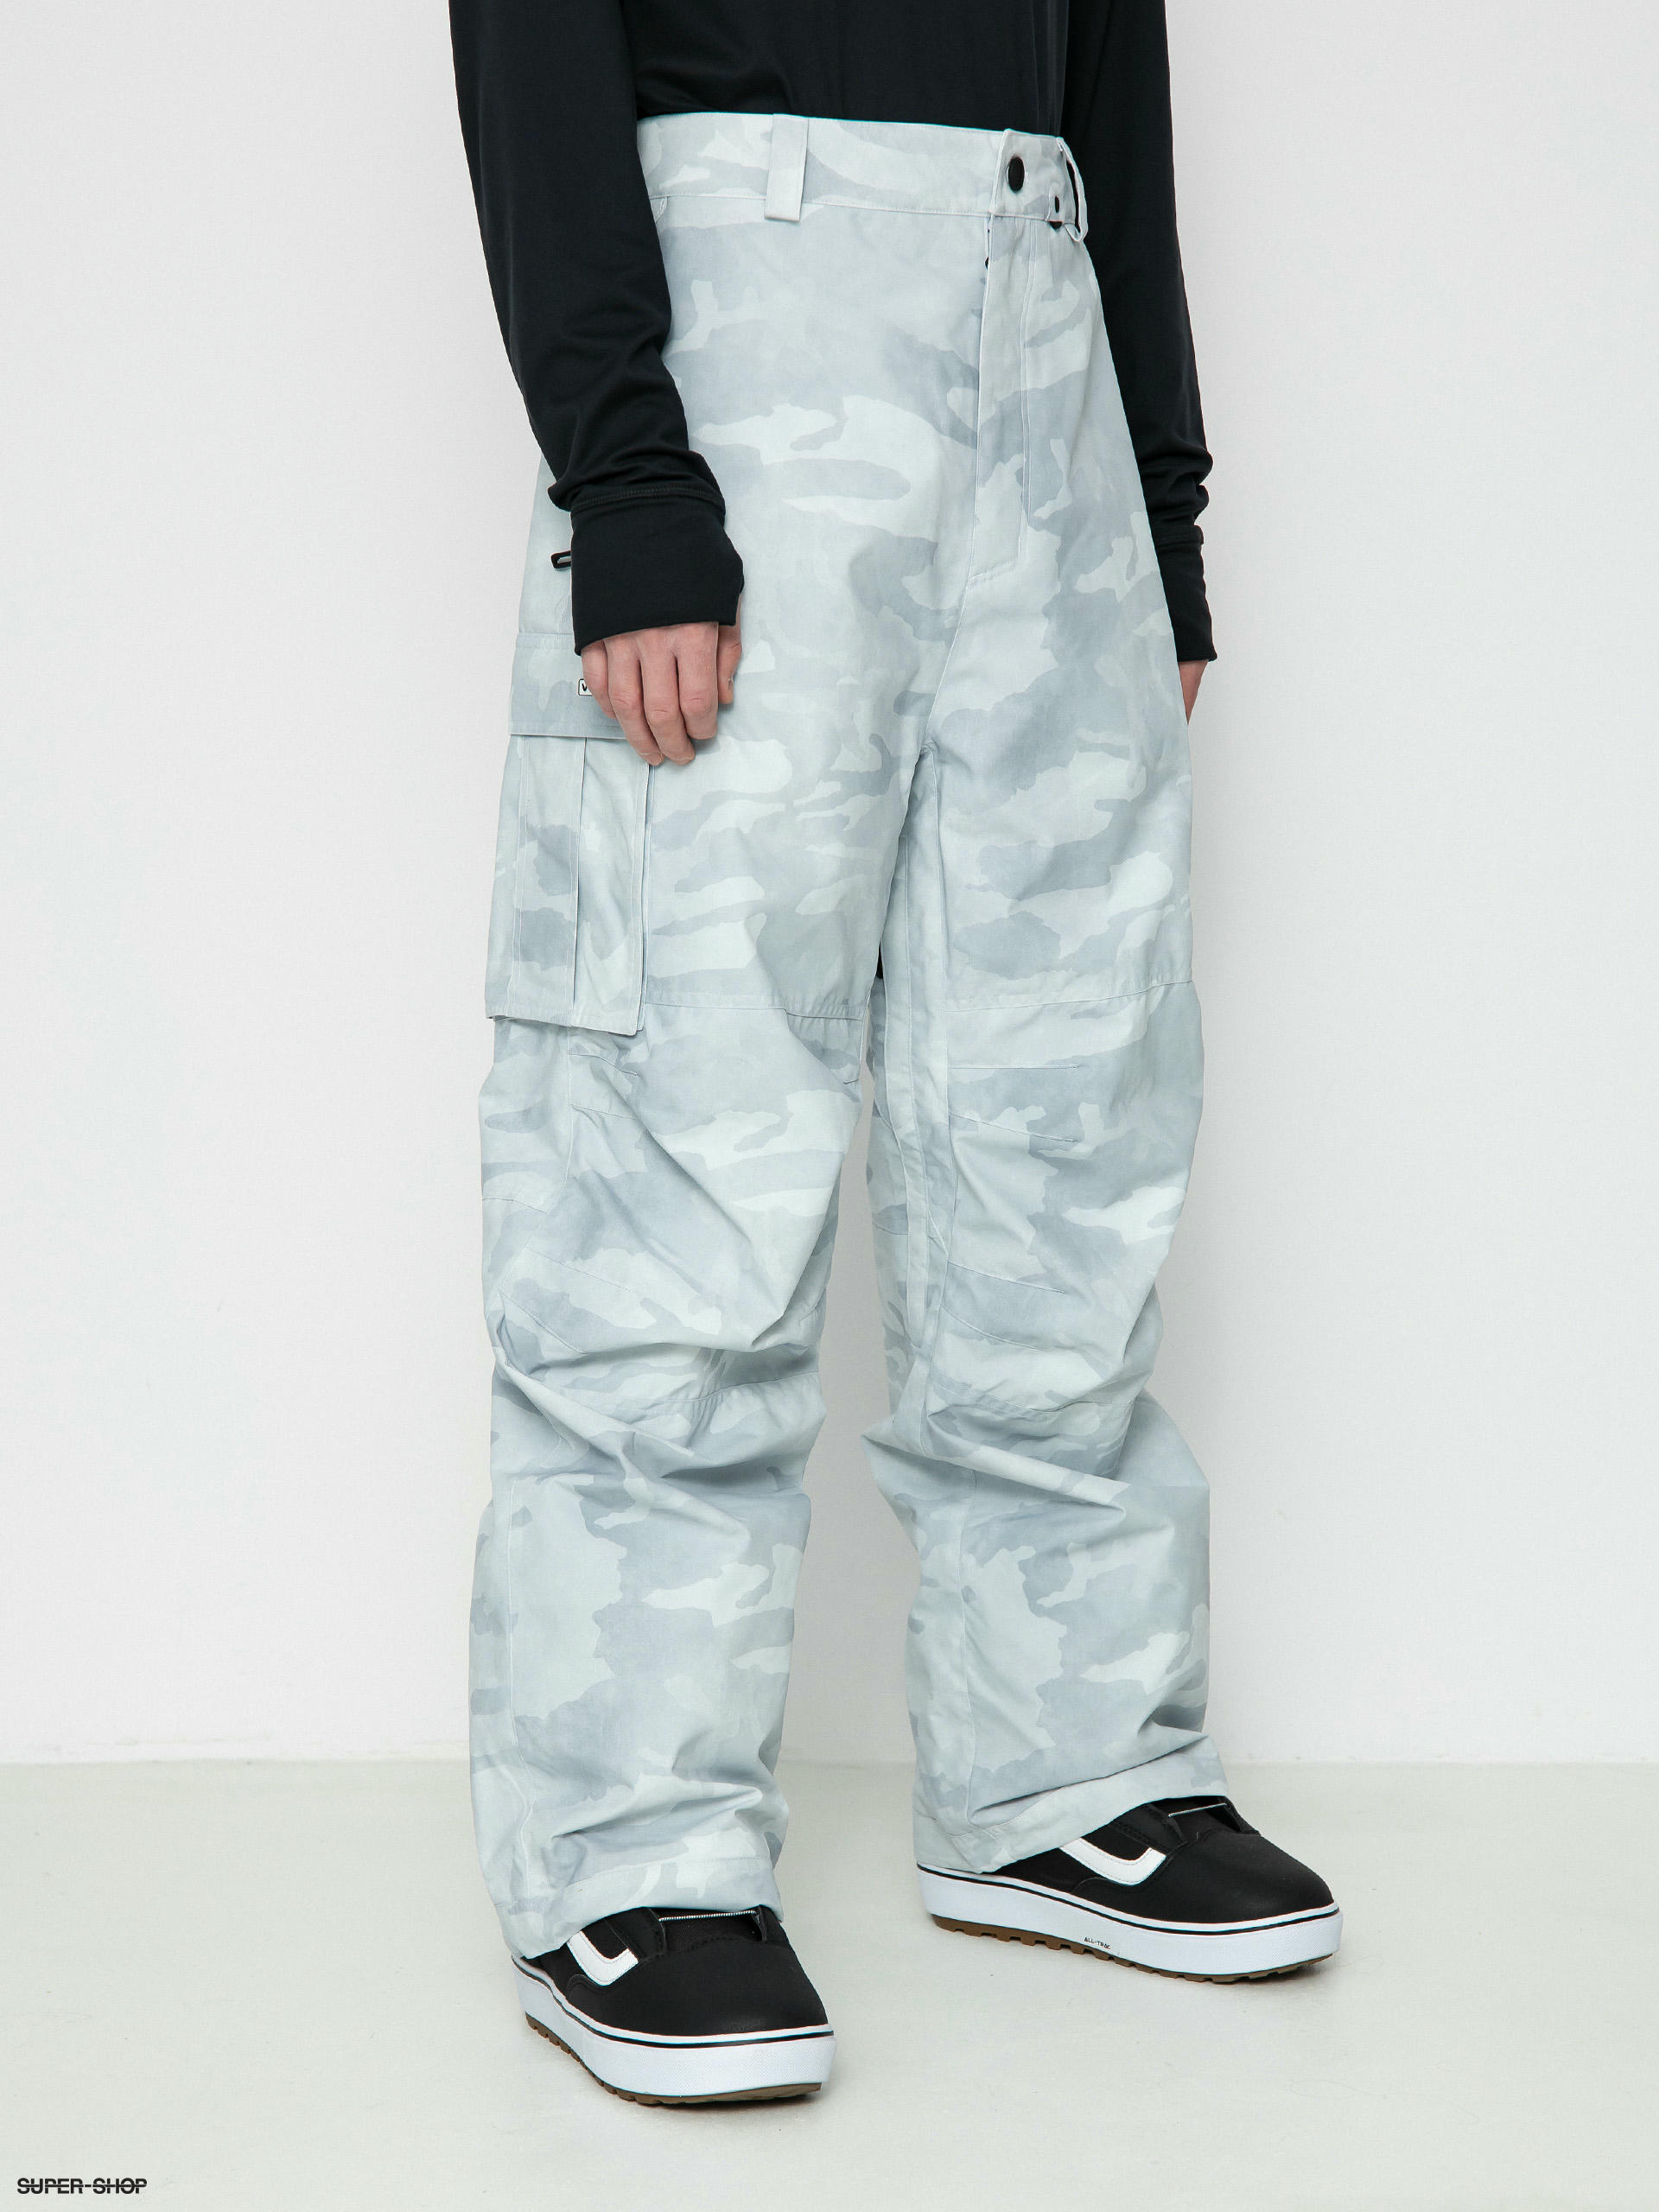 Men's Casual Military White Camouflage Camo Cargo Combat Work Pants Trousers  New | eBay